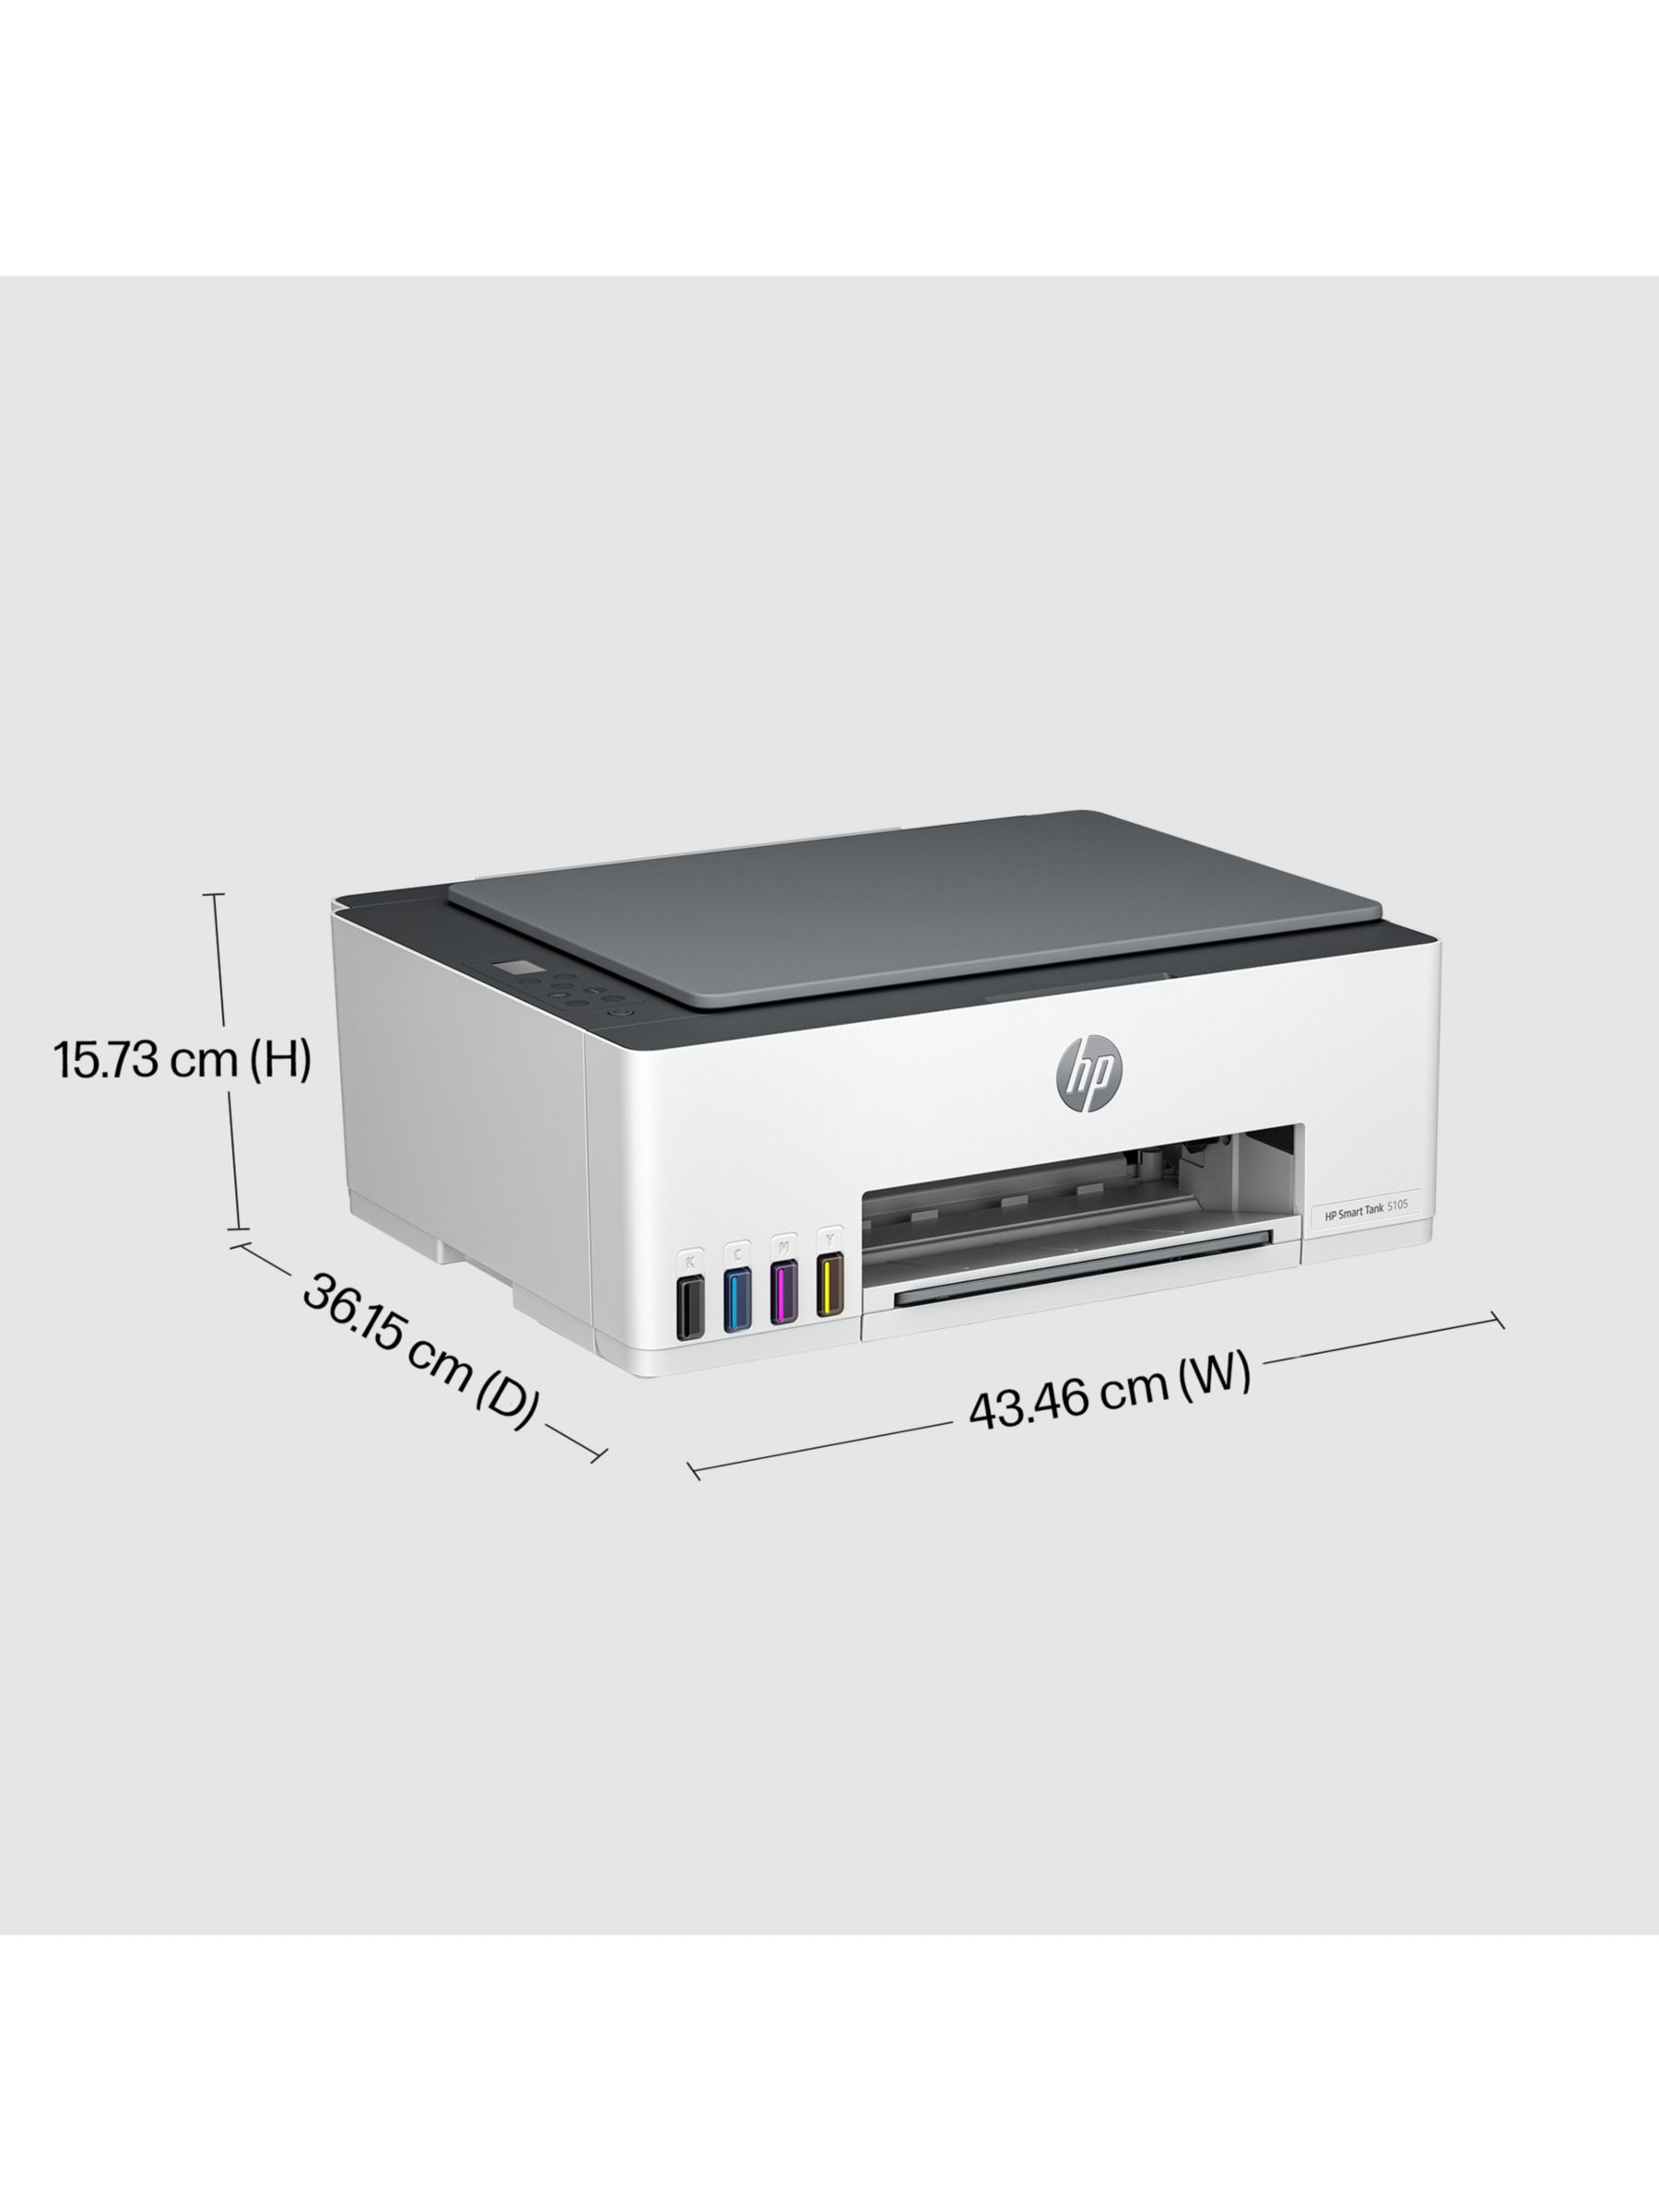 HP Smart Tank 5105 Wireless All-in-One Colour Printer - HP Store UK